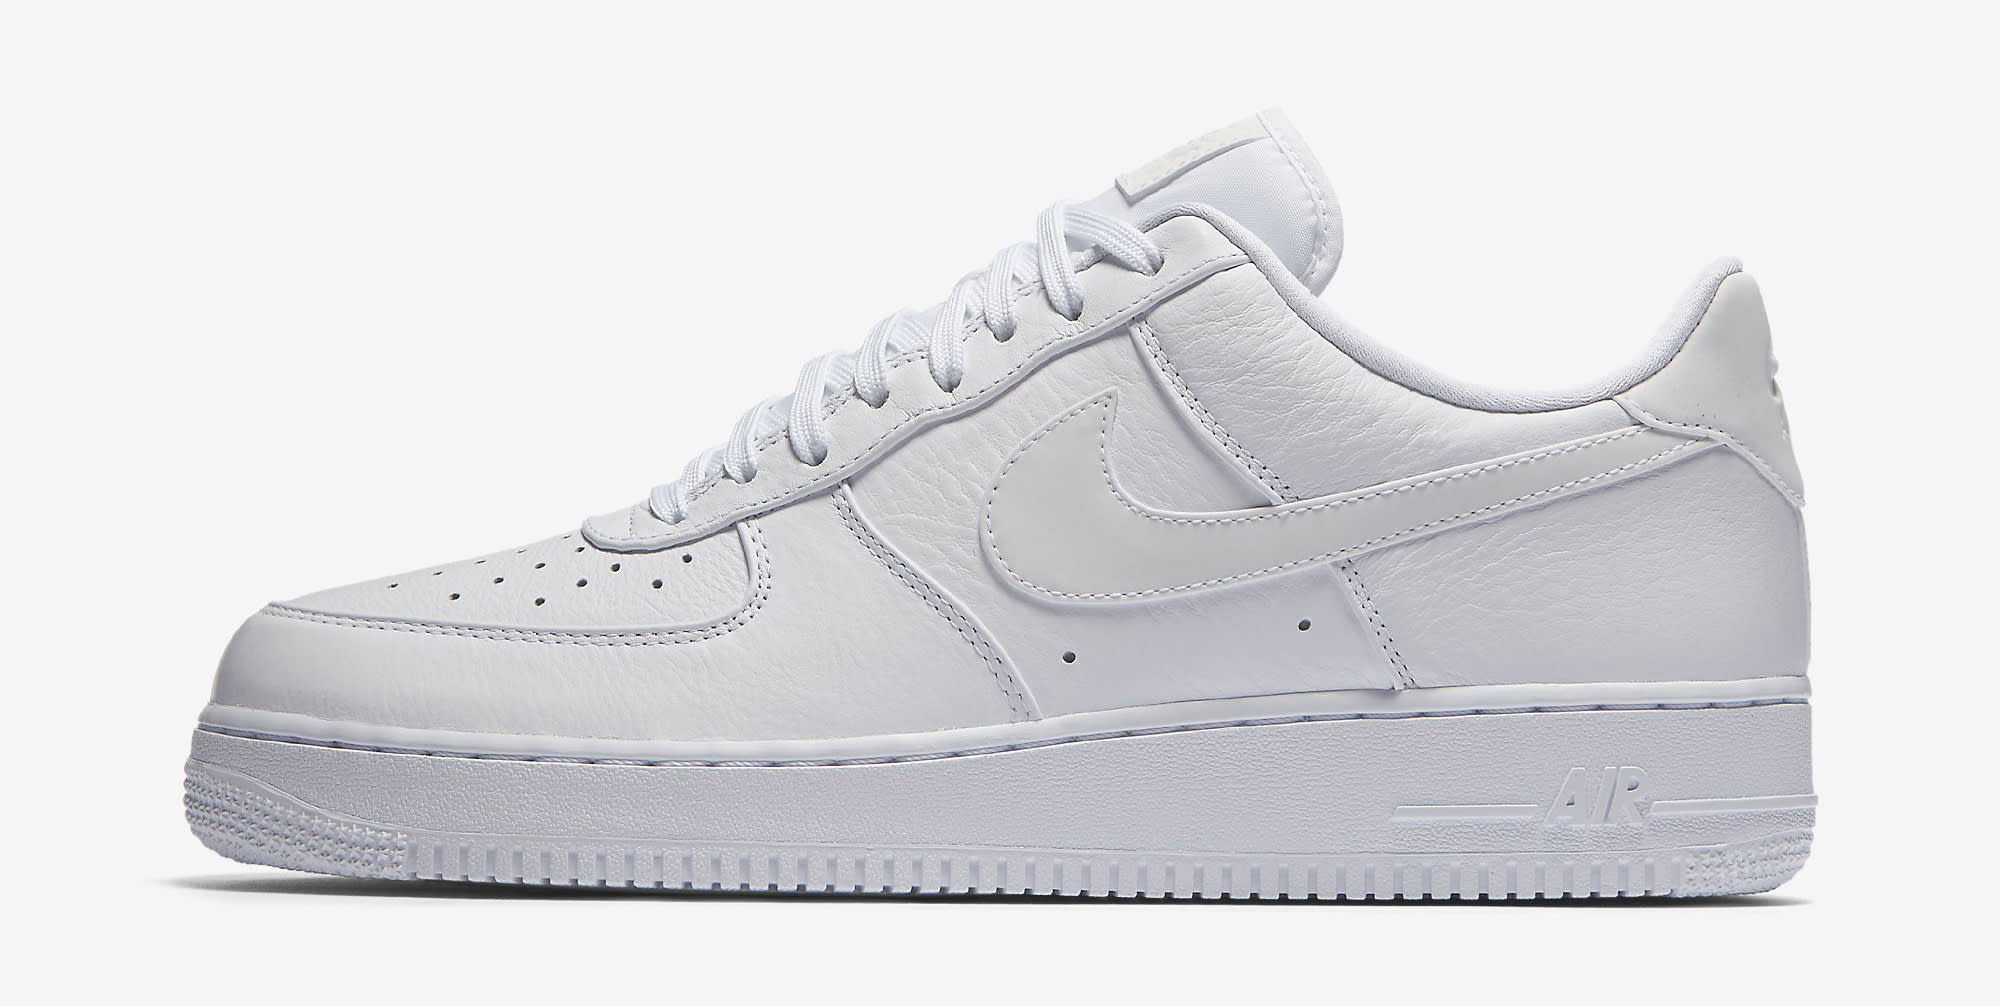 Nike Air Force 1 White Reflective 905345-100 Profile